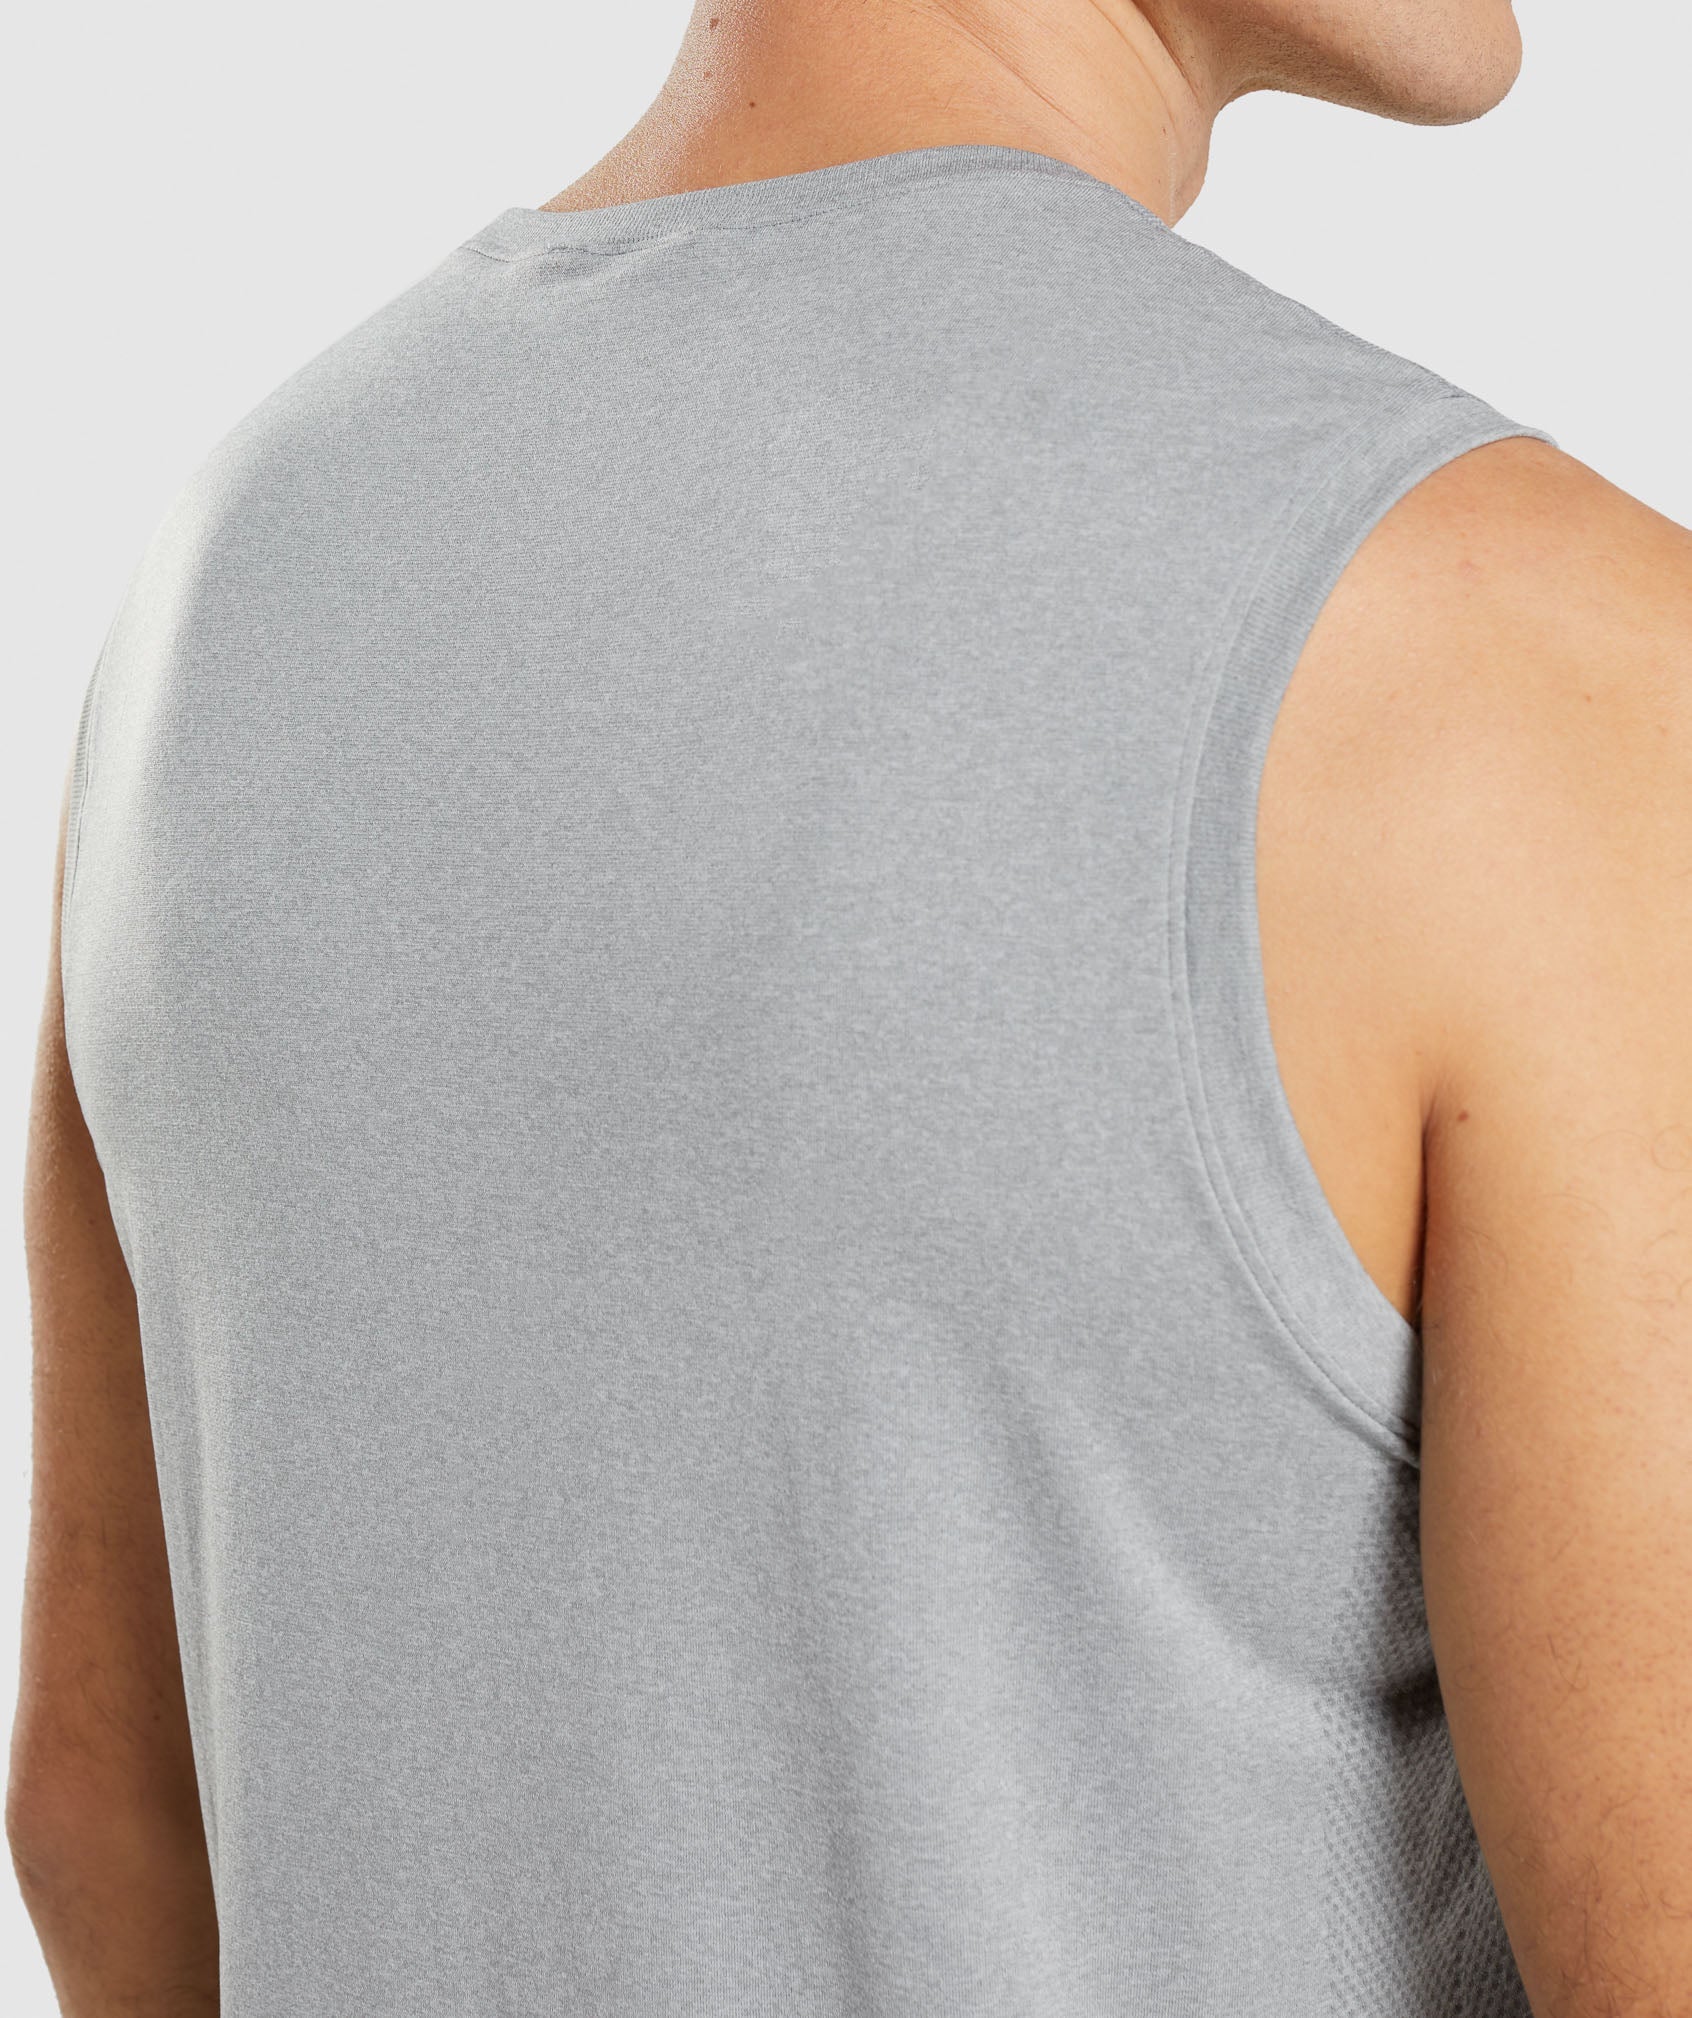 Arrival Seamless Tank in Grey - view 5